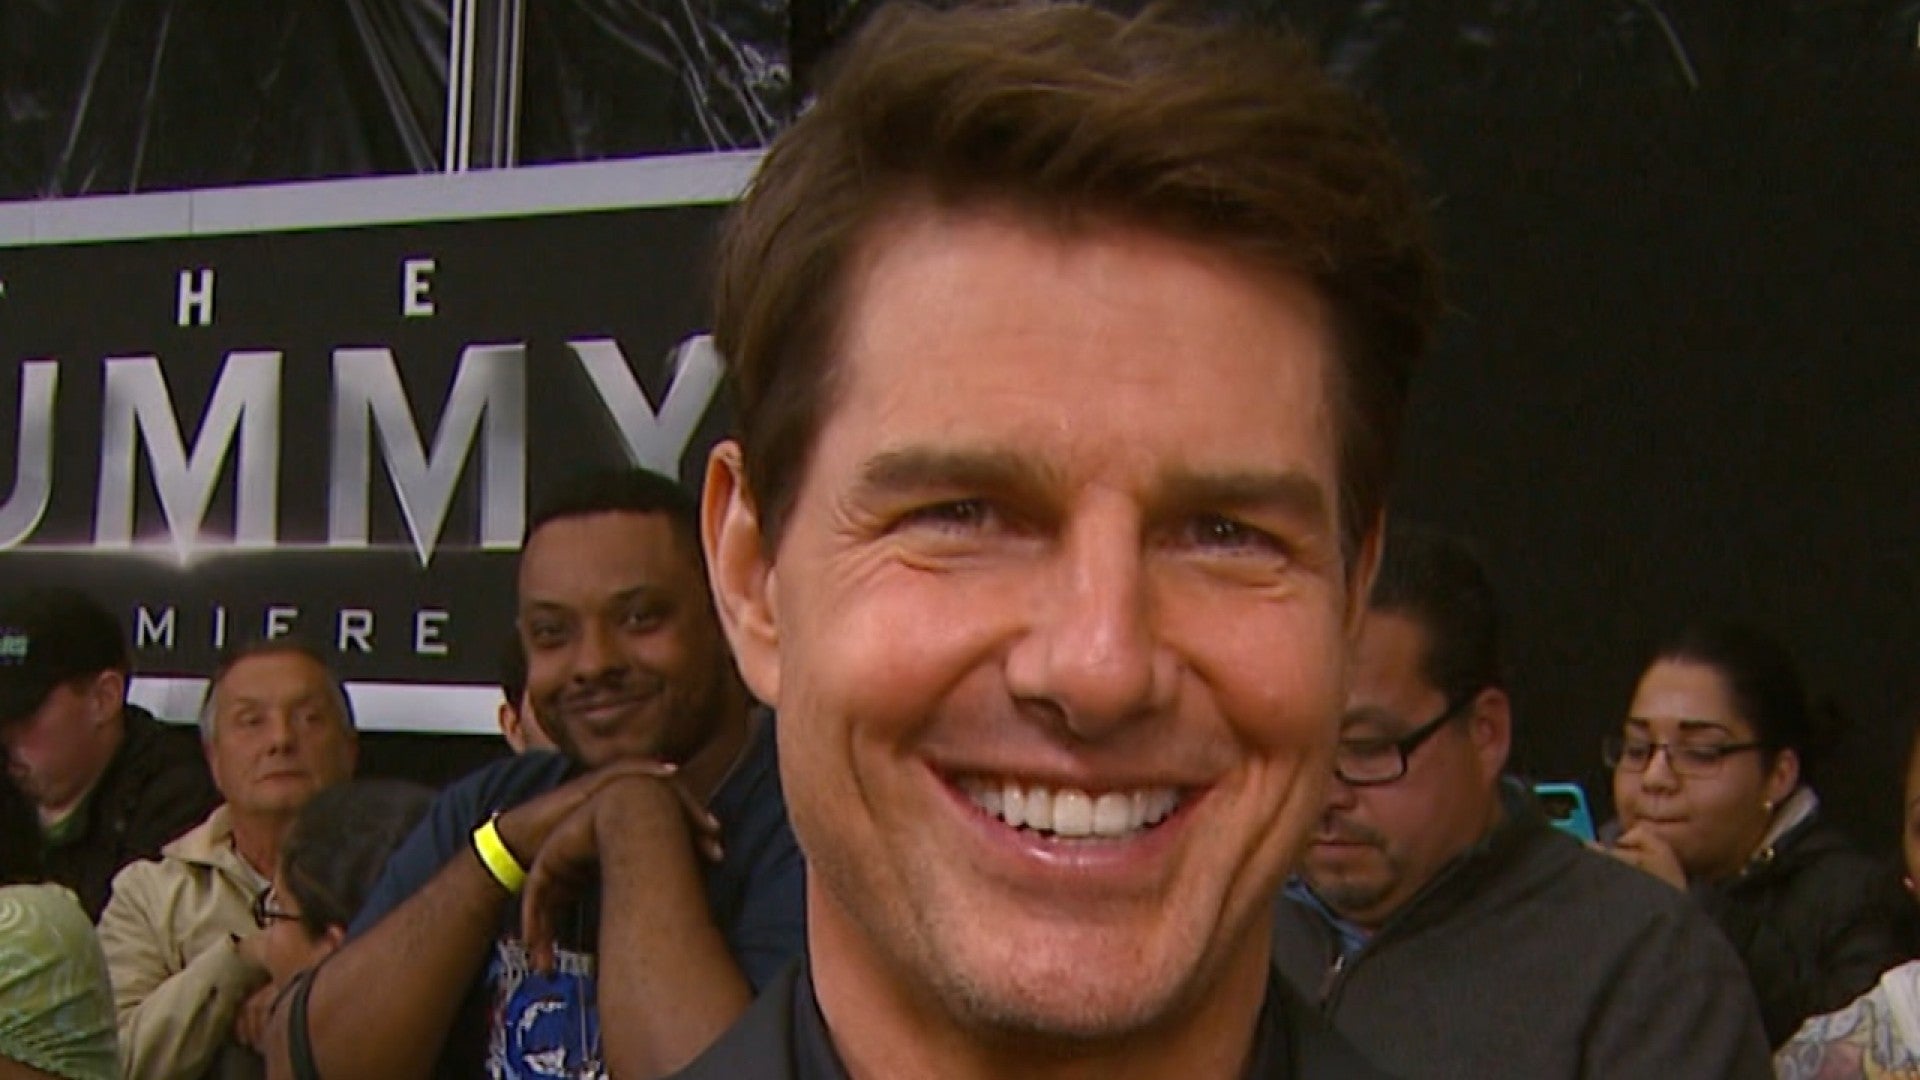 Tom Cruise on the Tense Moment in 'The Mummy' With Co-Star Sofia Boutella